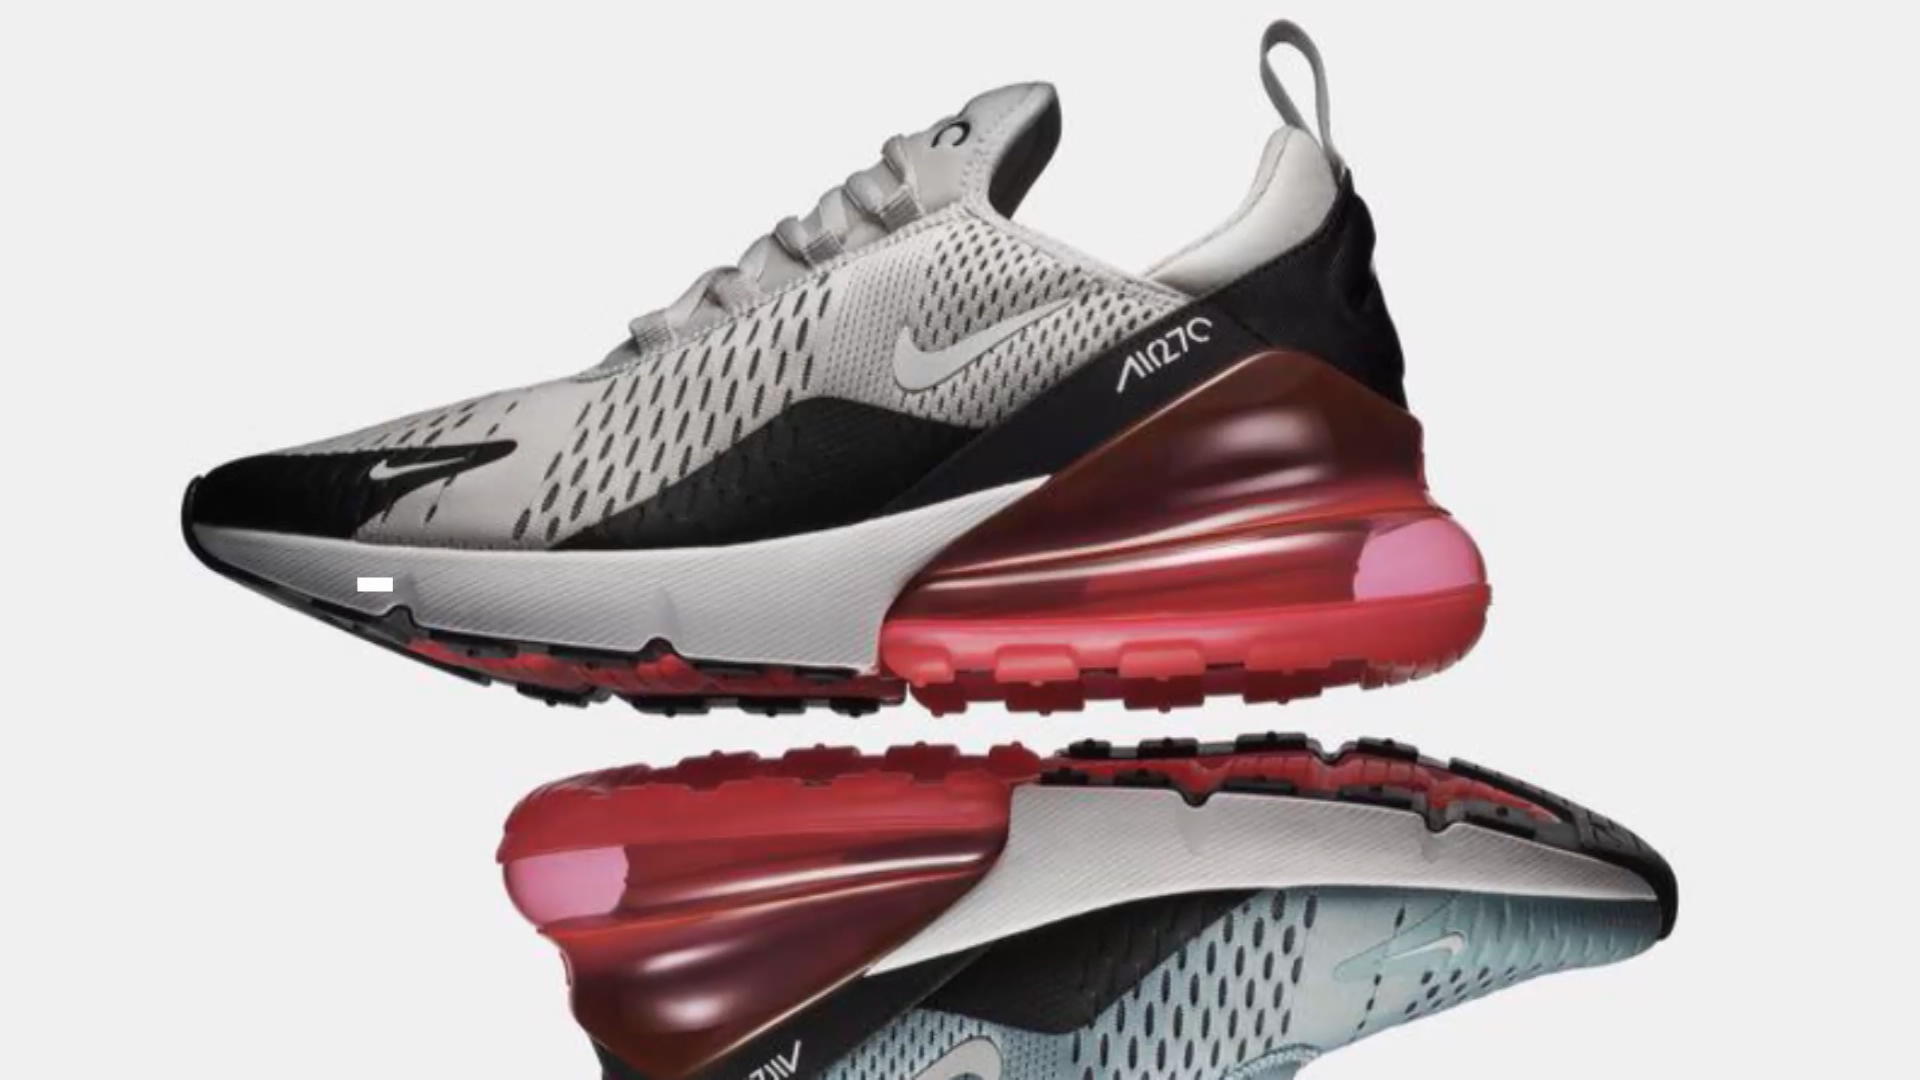 Knop plasticitet Rend Nike Faces Muslim Anger Over Alleged 'Allah' in AirMax Logo - Bloomberg